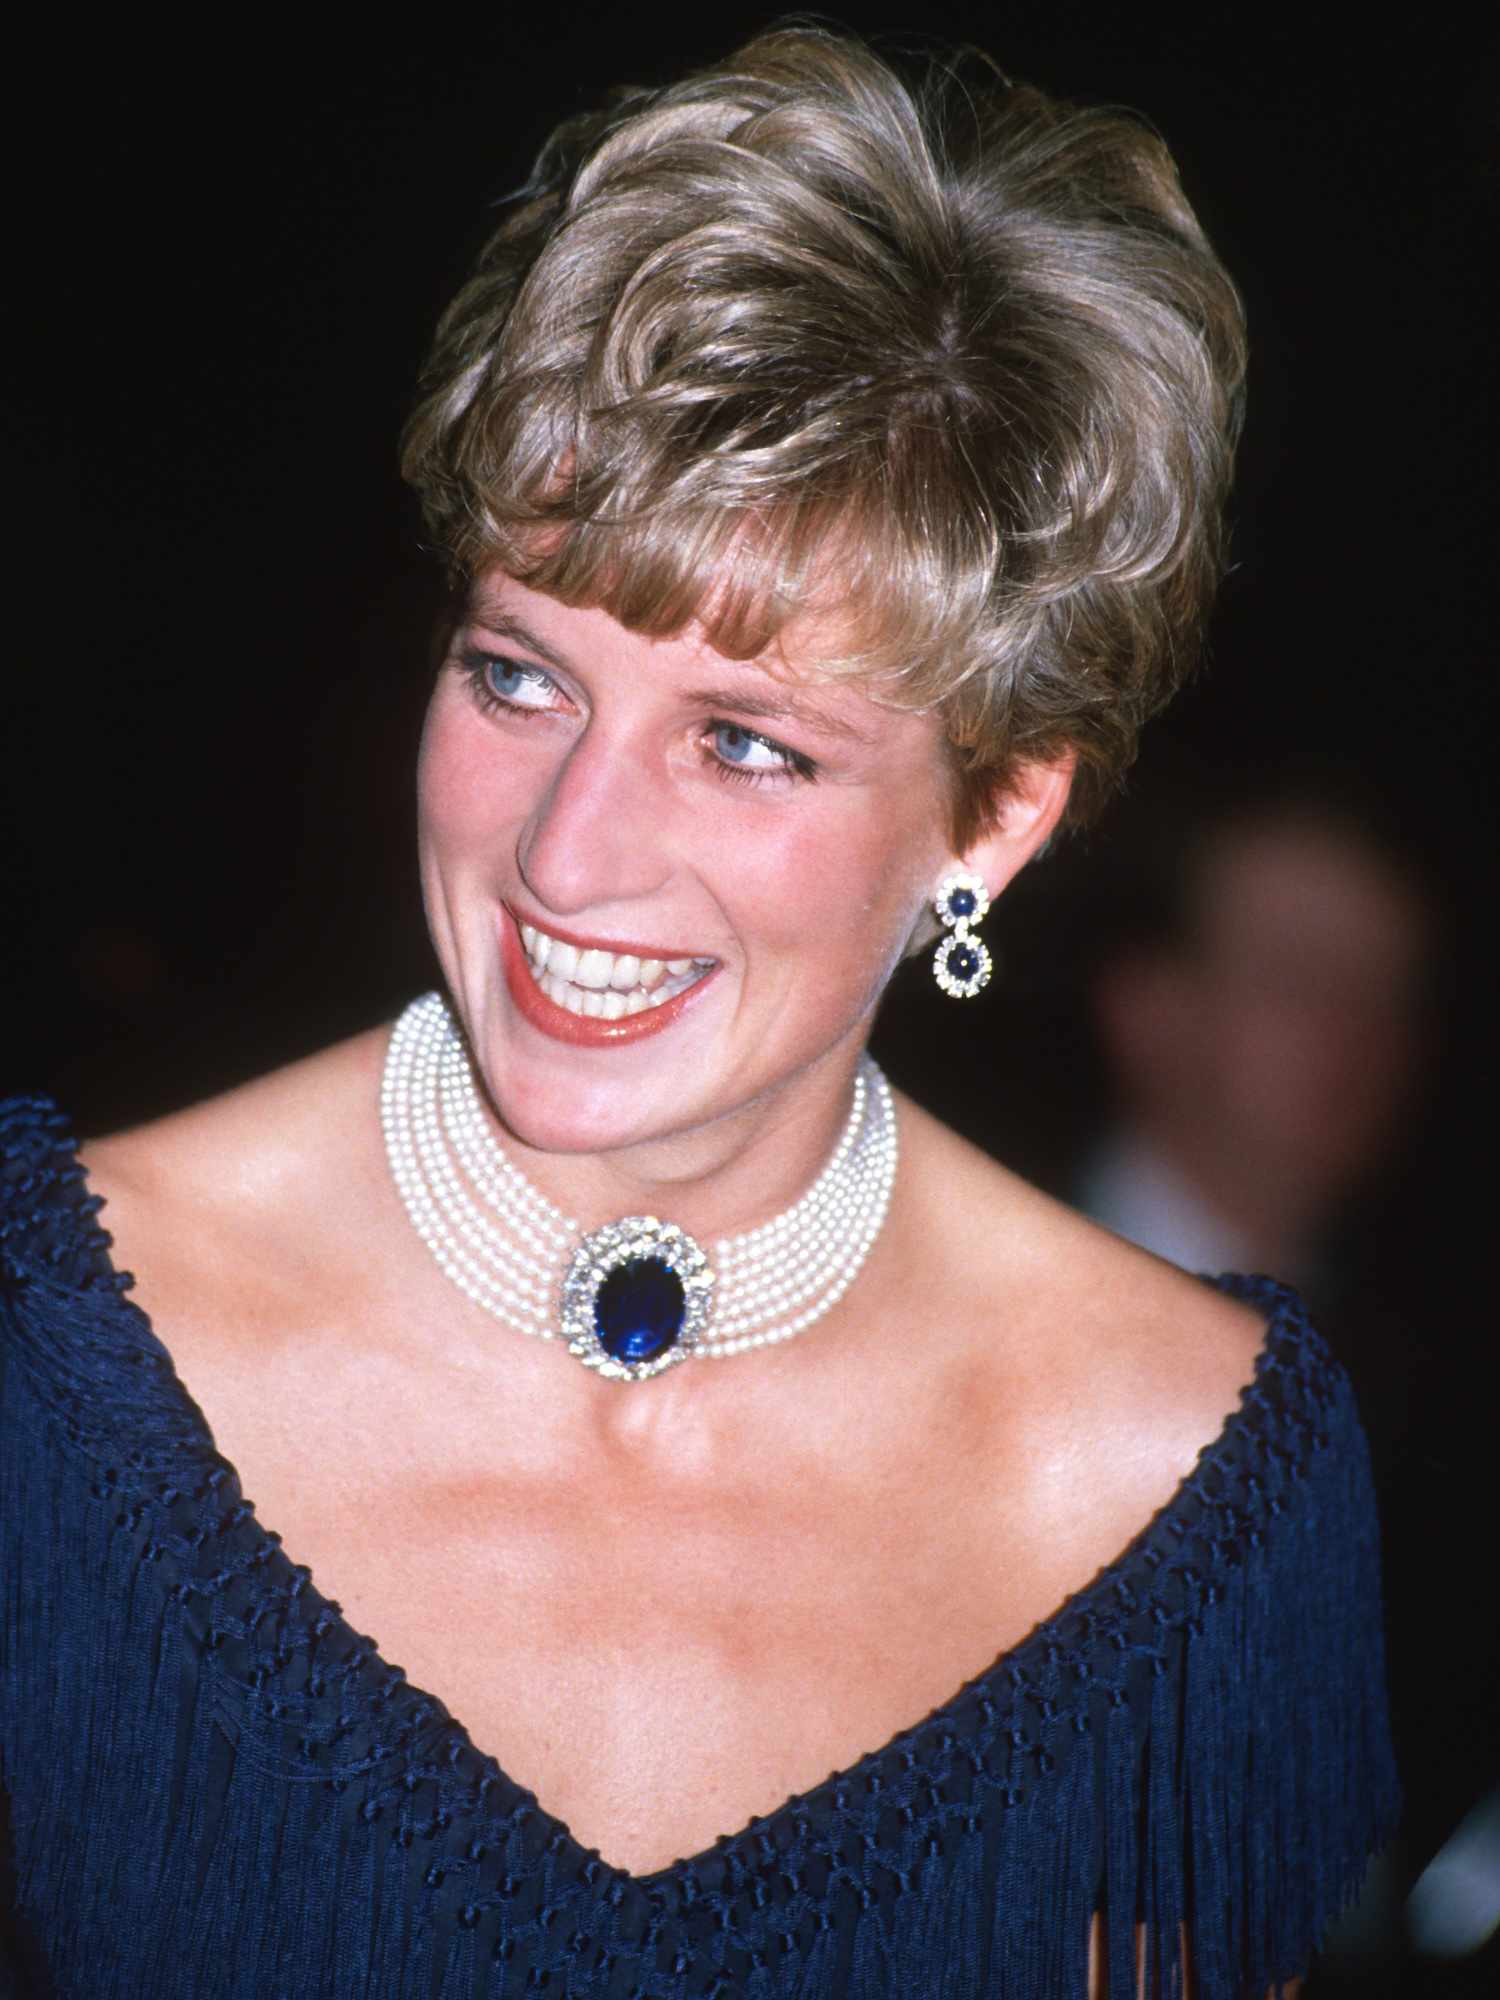 Princess Diana wears a short voluminous pixie haircut with bangs, sapphire jewelry, and a blue fringed cocktail dress